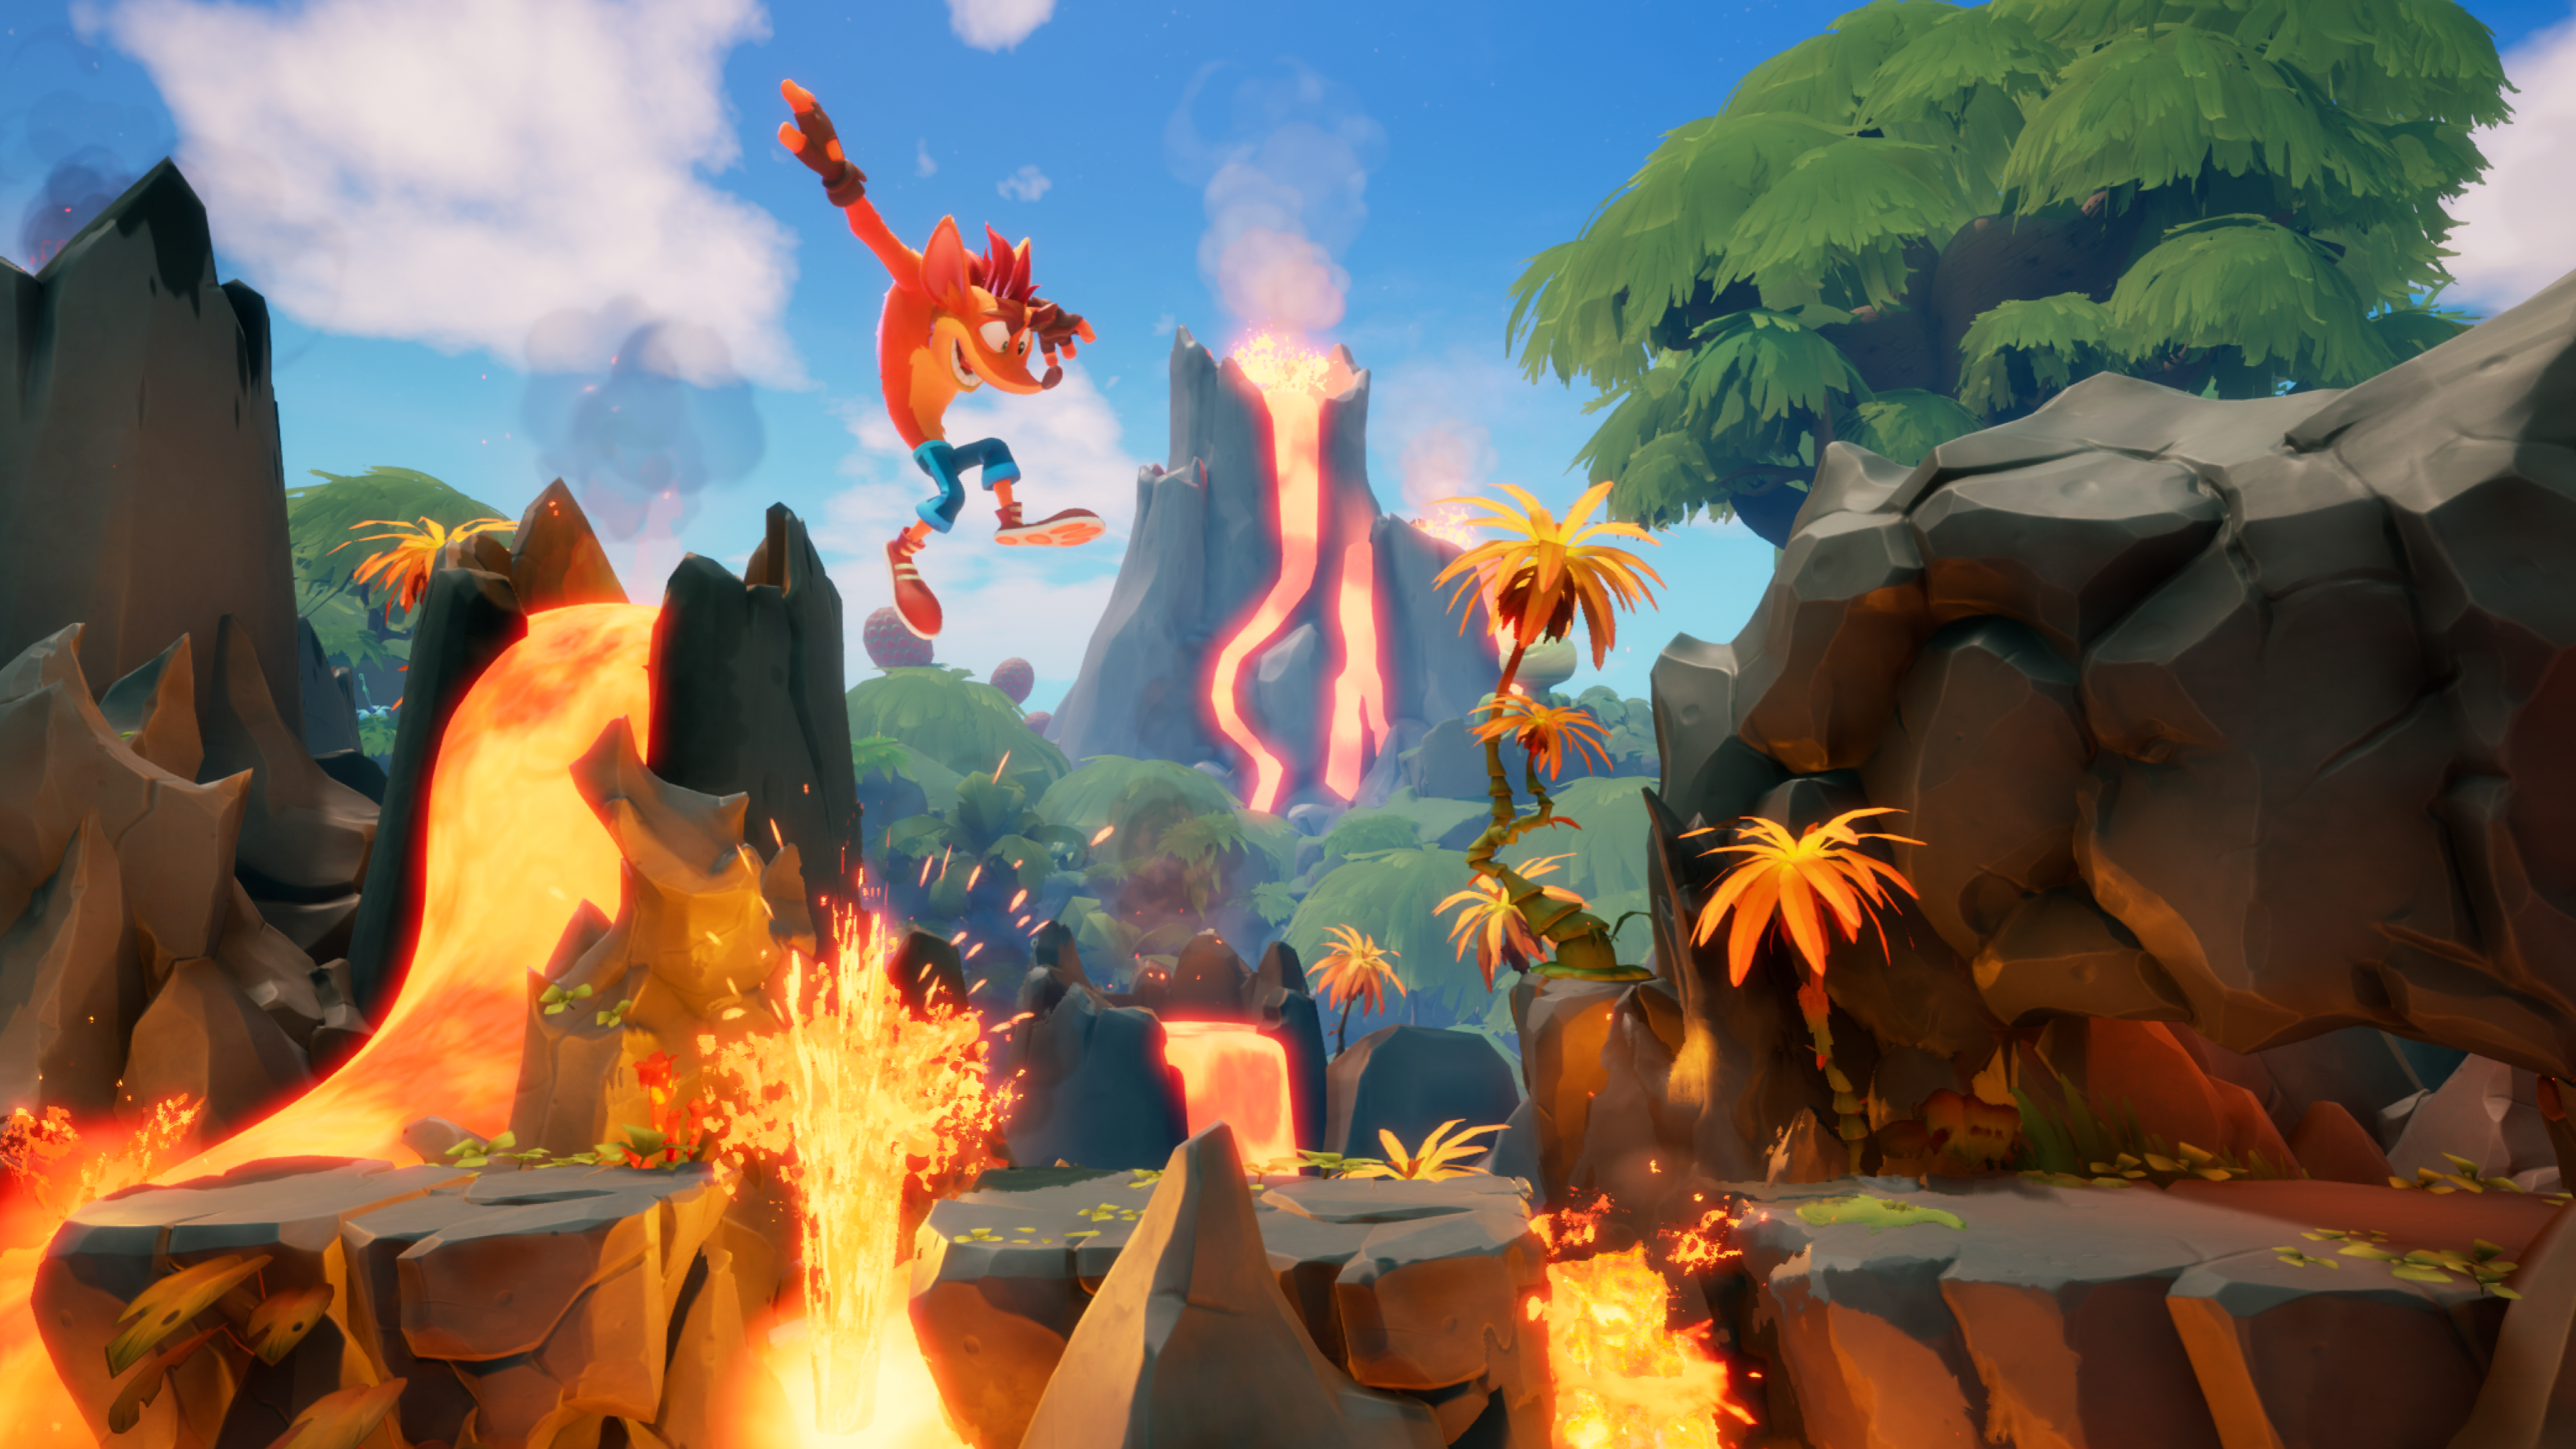 Crash Bandicoot 4: It's About Time - PlayStation 4 - image 2 of 6